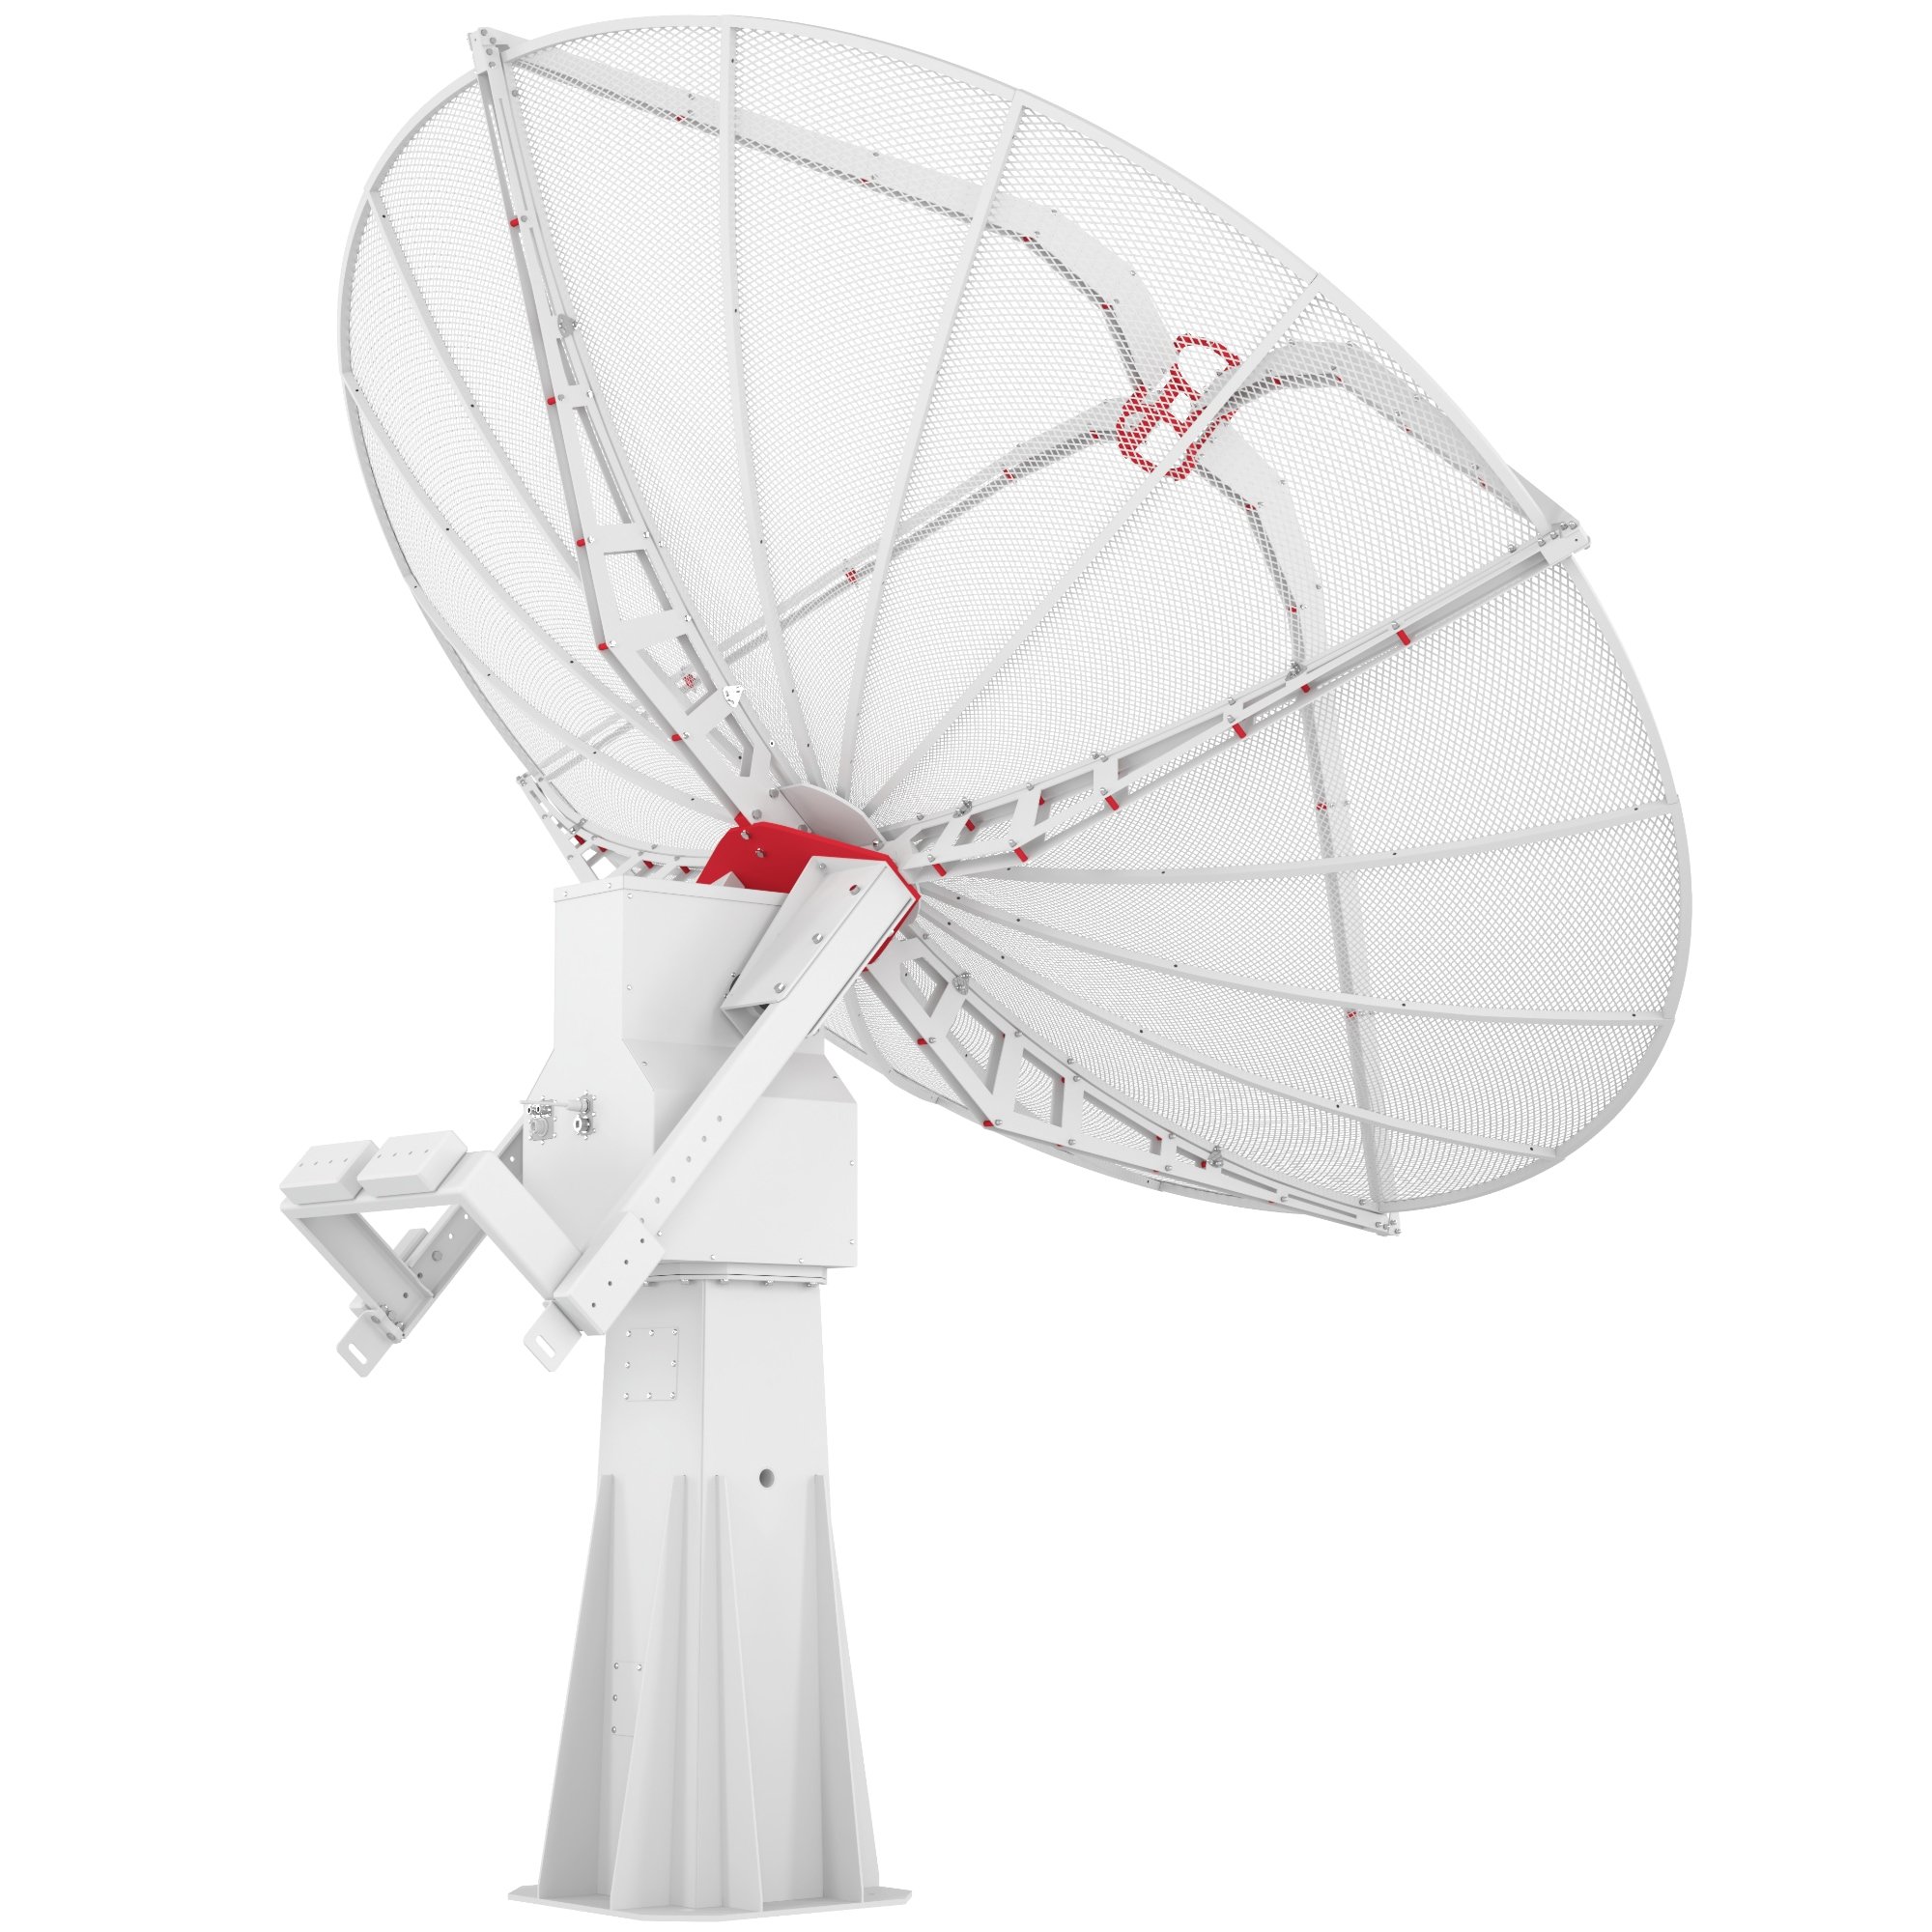 INTREPID 3.0m ground station antenna system for L/S-band - Radio2Space